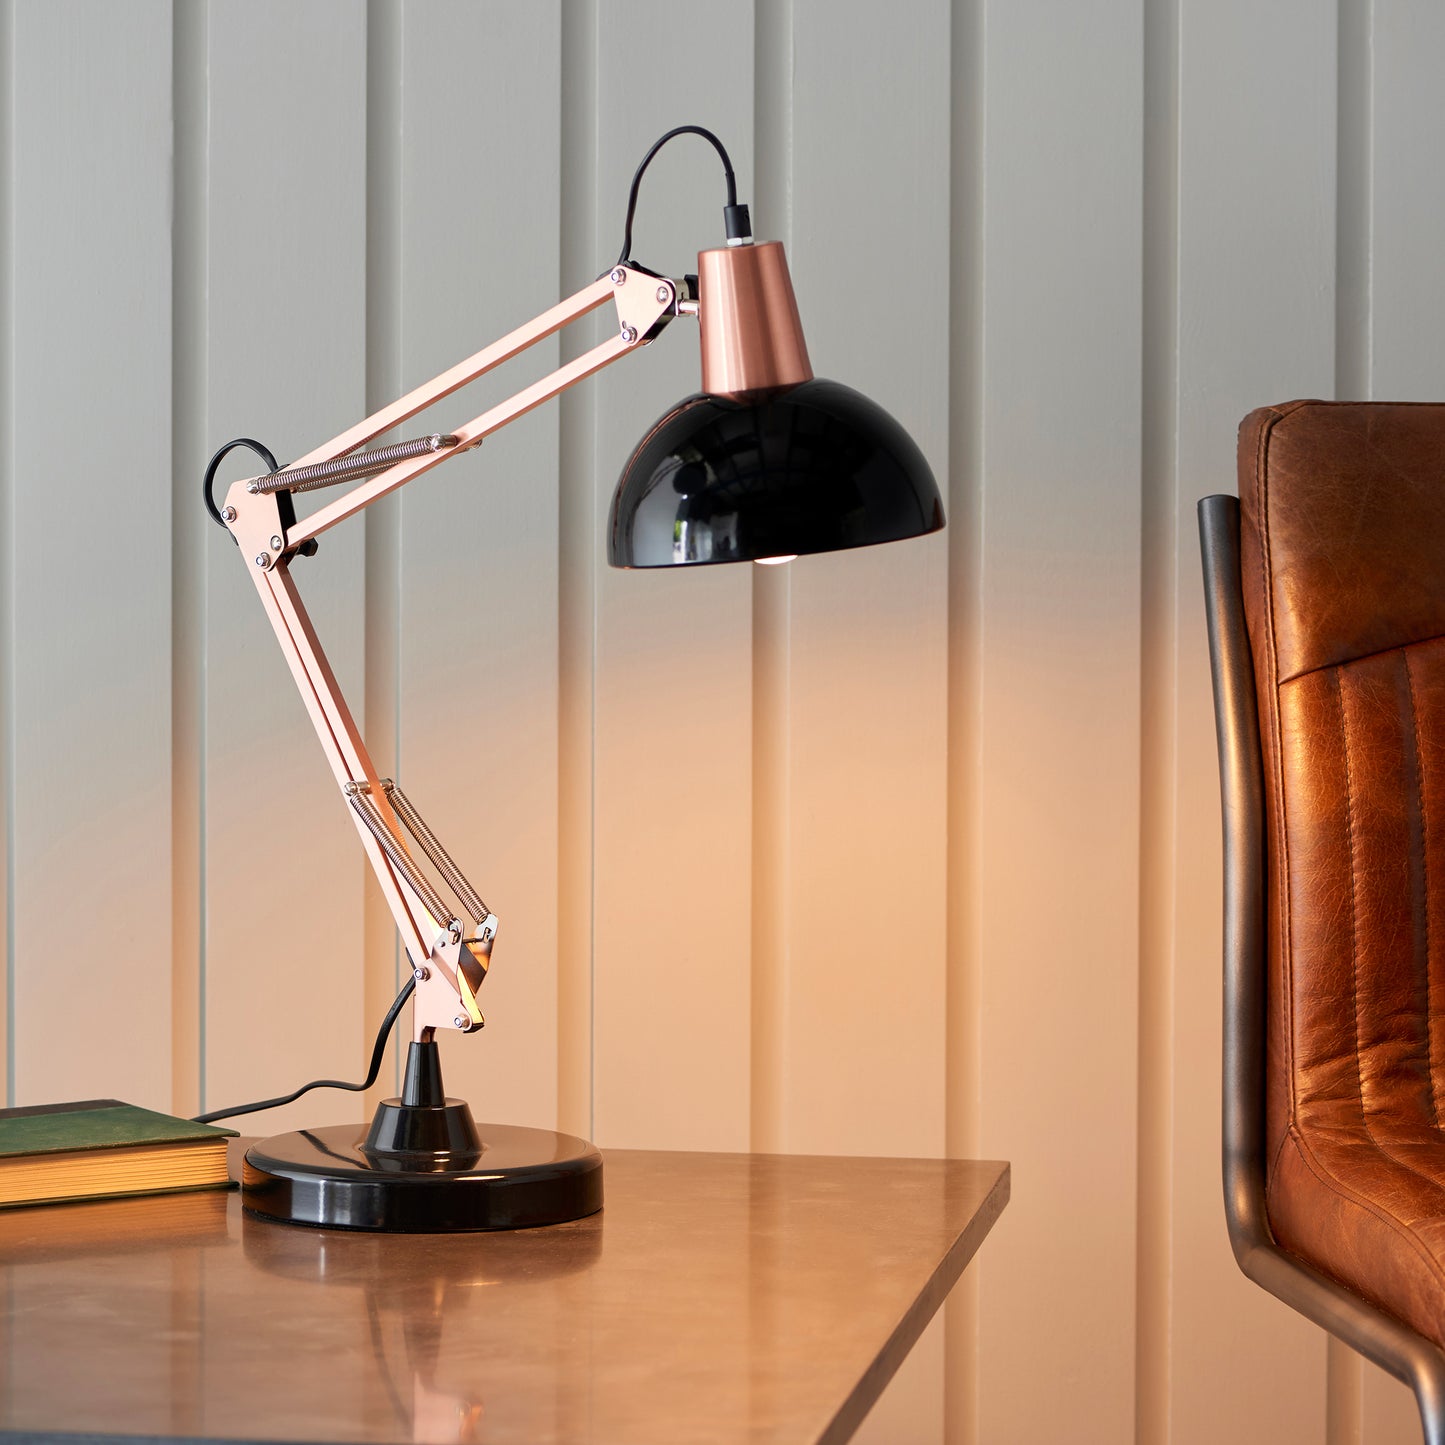 A Marshall 1 Table Light Bronze & Black by Kikiathome.co.uk featuring interior decor and home furniture elements like a leather chair and a book.